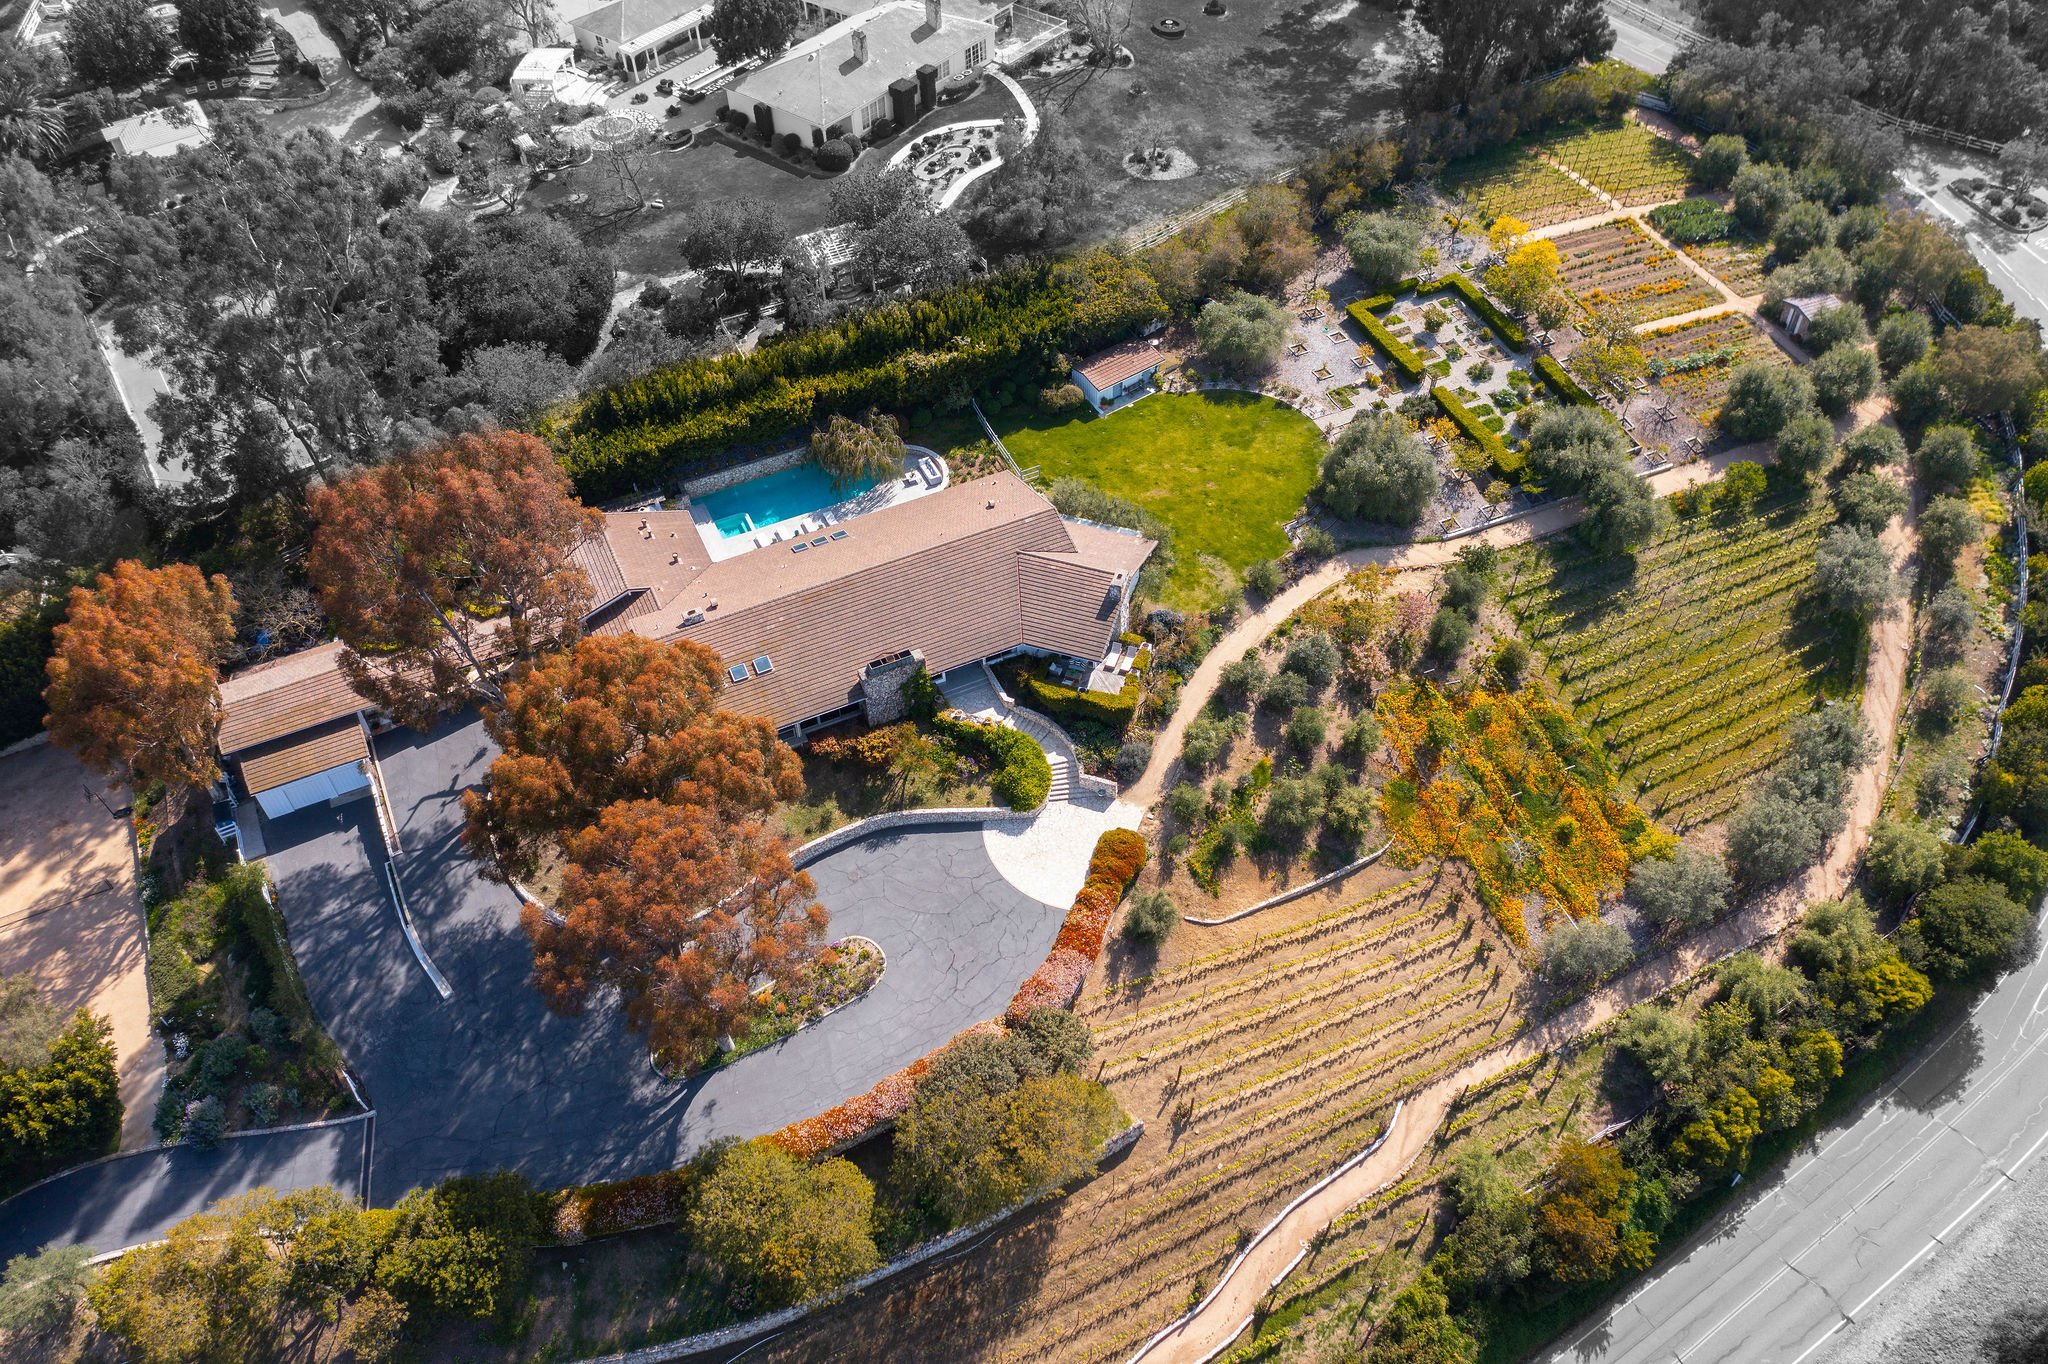 Francis York This Mid-Century Ranch with Award-Winning Vineyards is a ‘House of Dreams’ in Palos Verdes, California 3.jpg